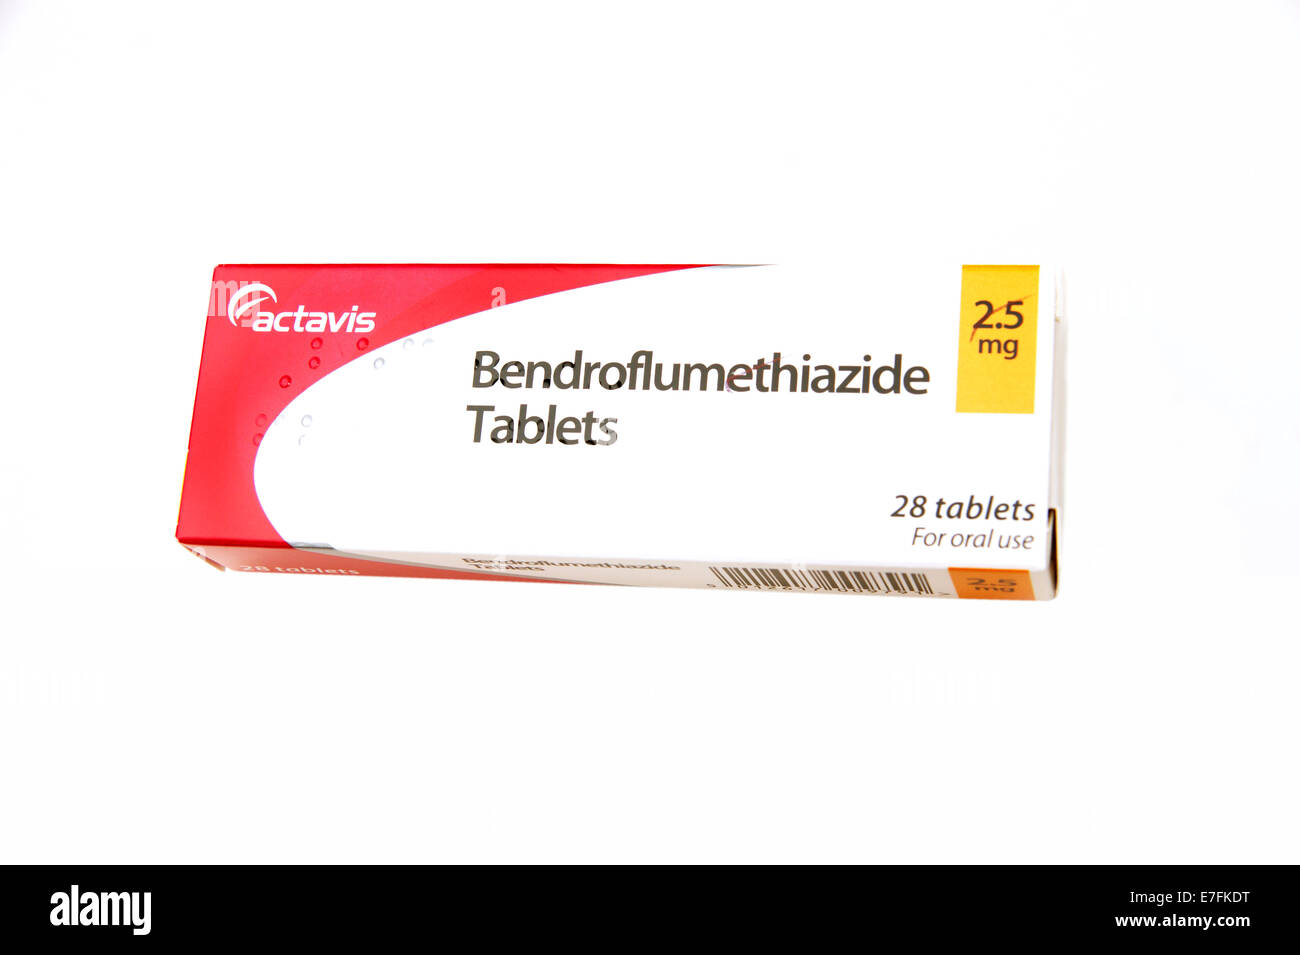 Bendroflumethiazide tablets for treating excess fluid build up in the body caused by certain conditions or medicines & also high Stock Photo